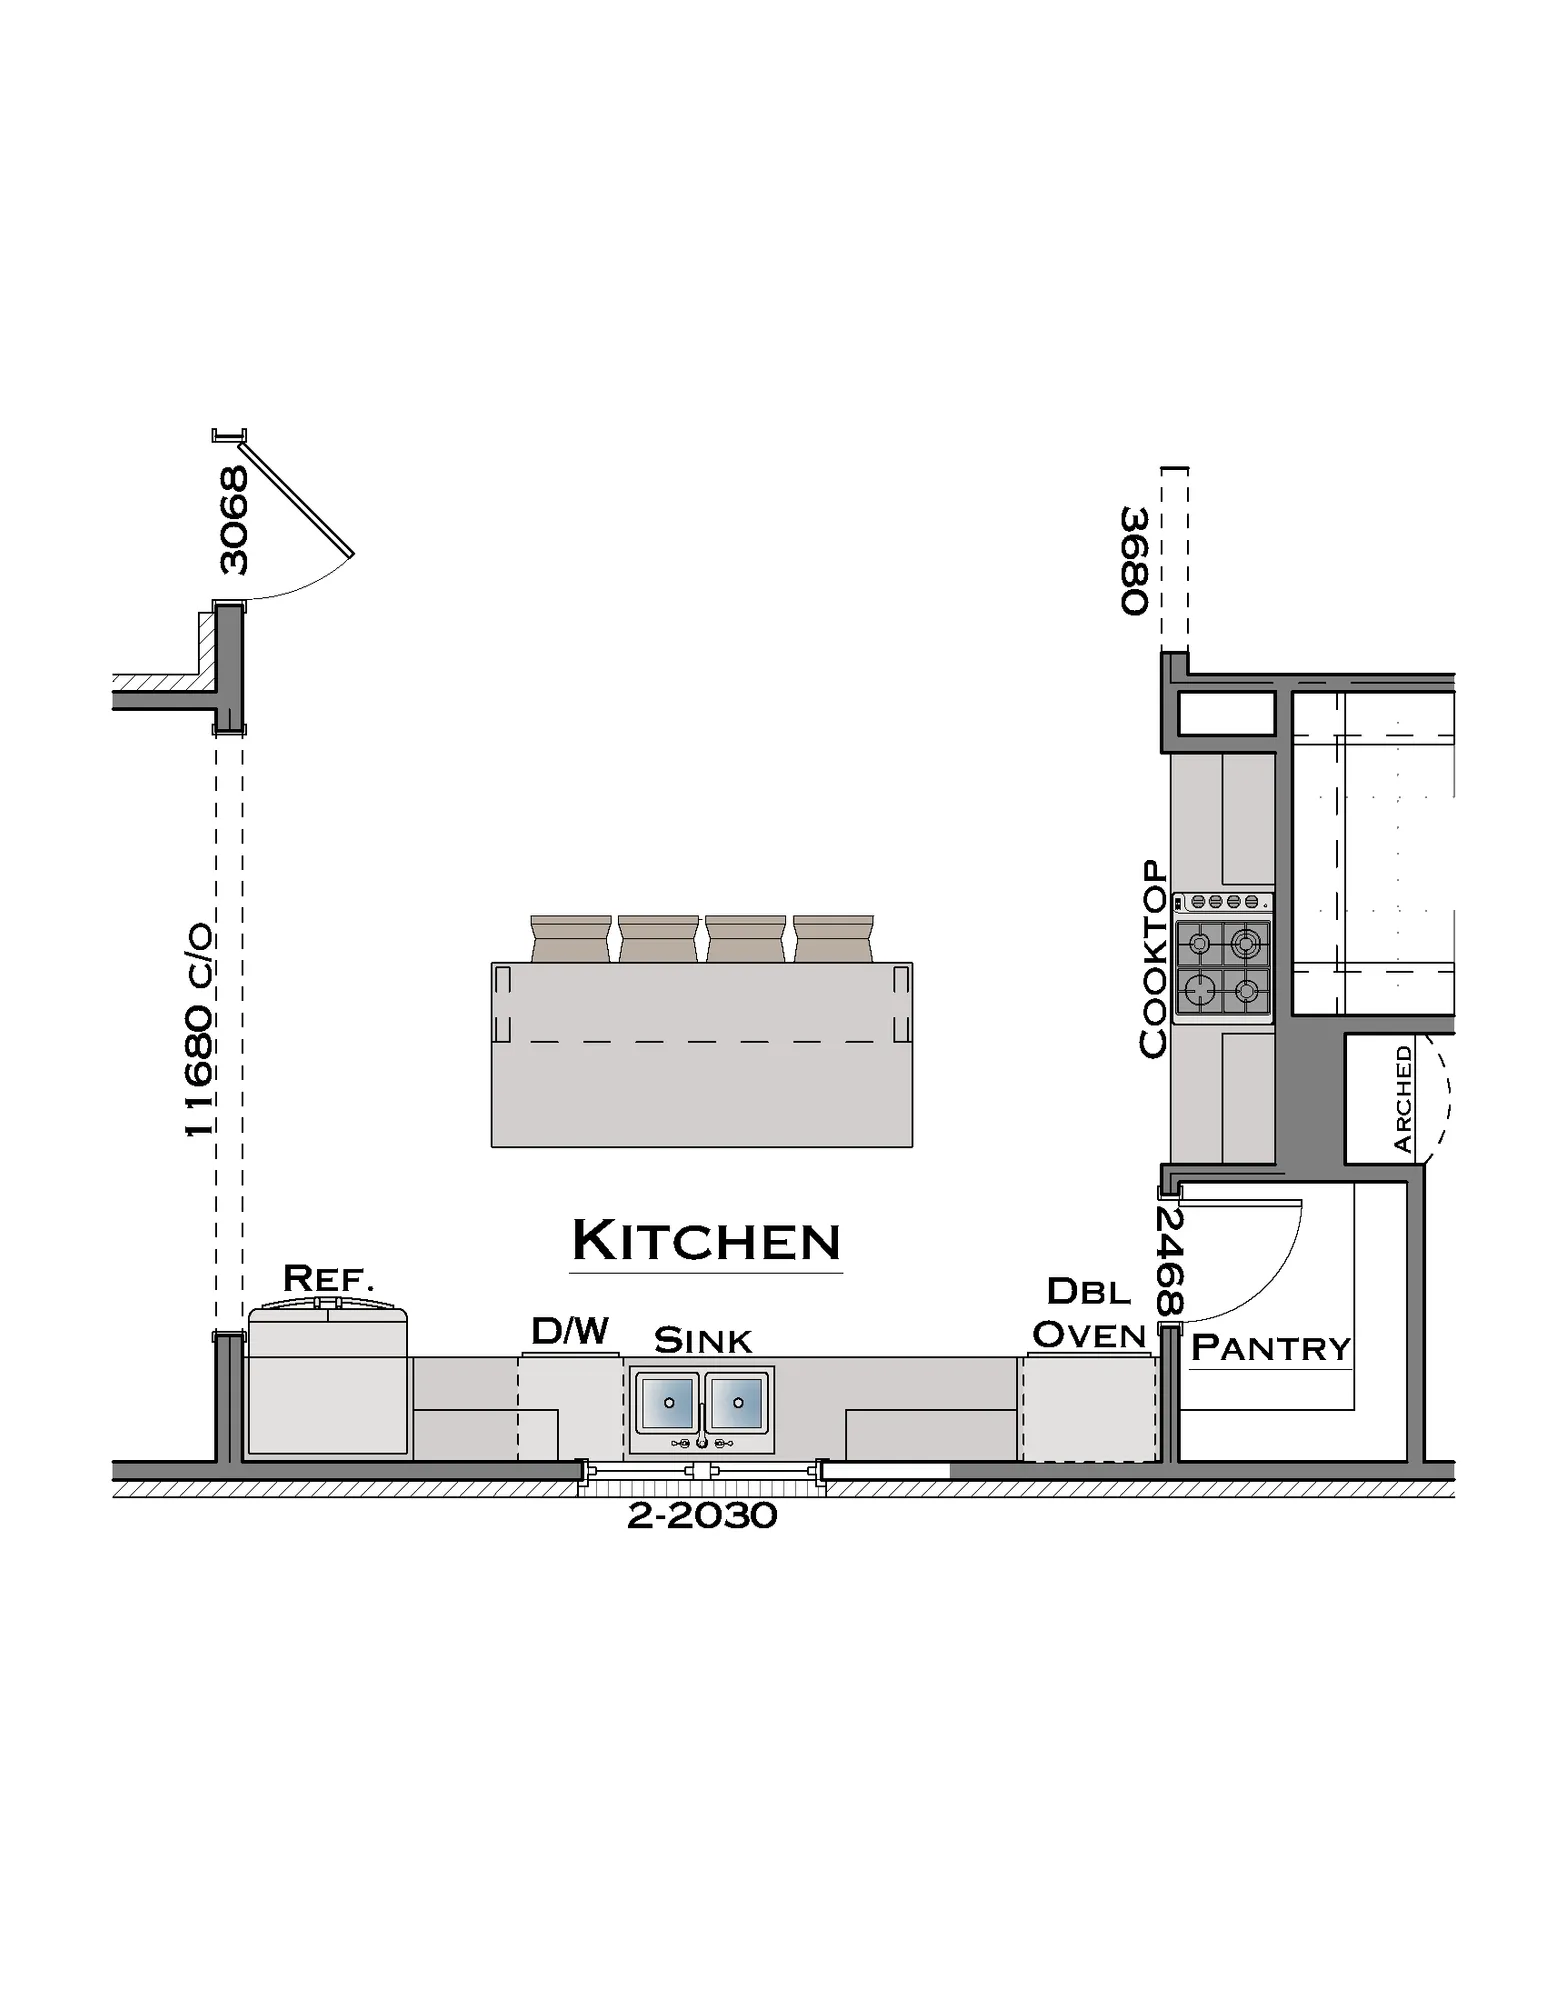 Chef Kitchen with Double Oven - undefined